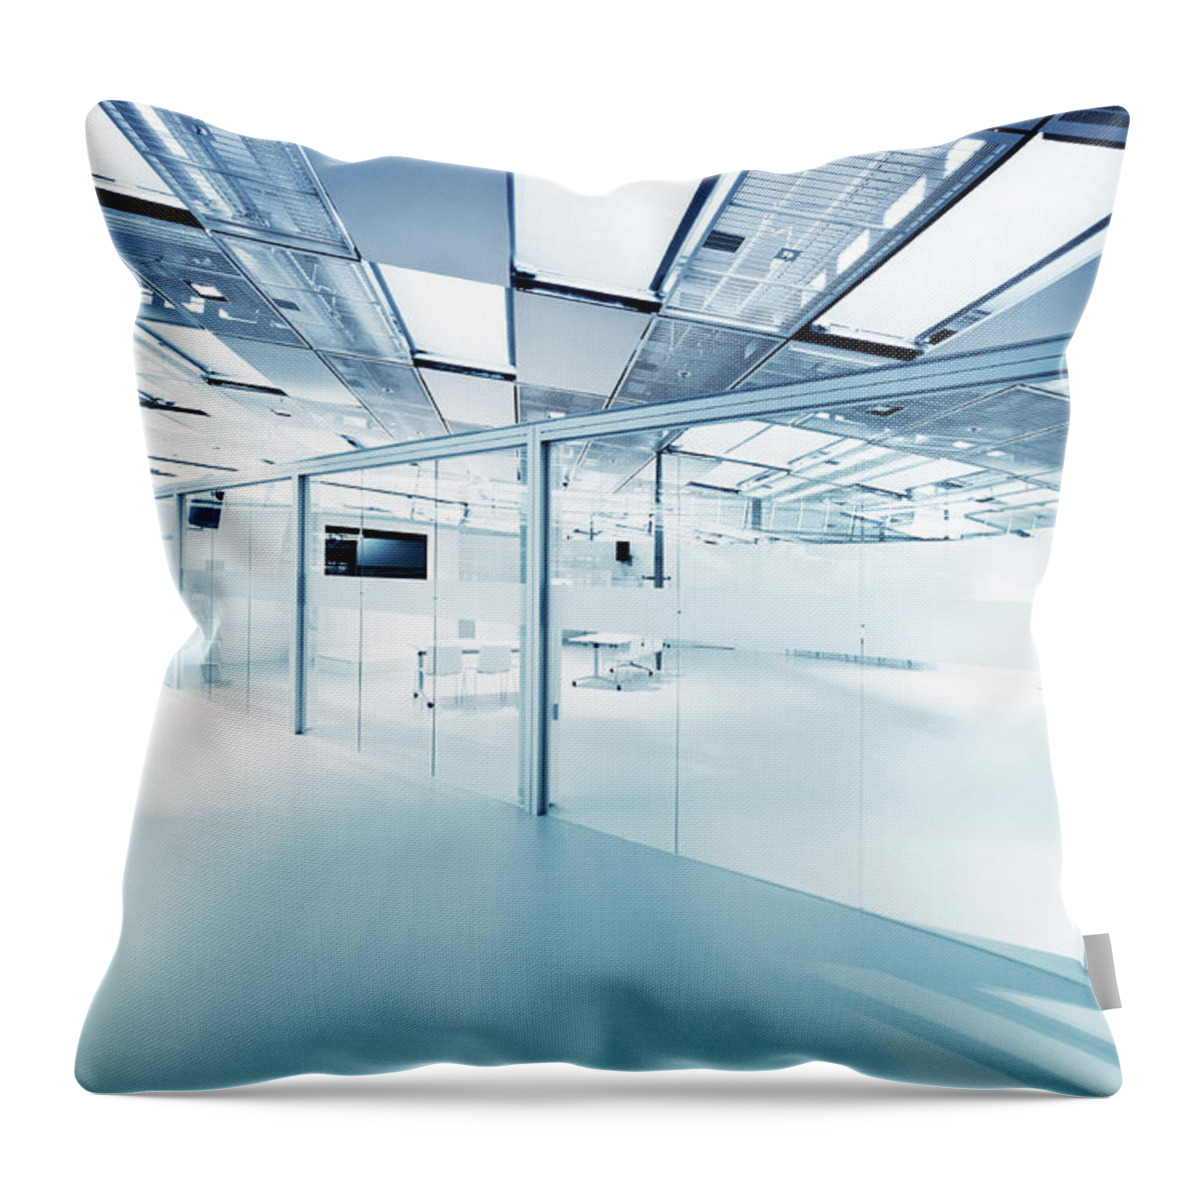 Empty Throw Pillow featuring the photograph Empty Modern Office by Ppampicture